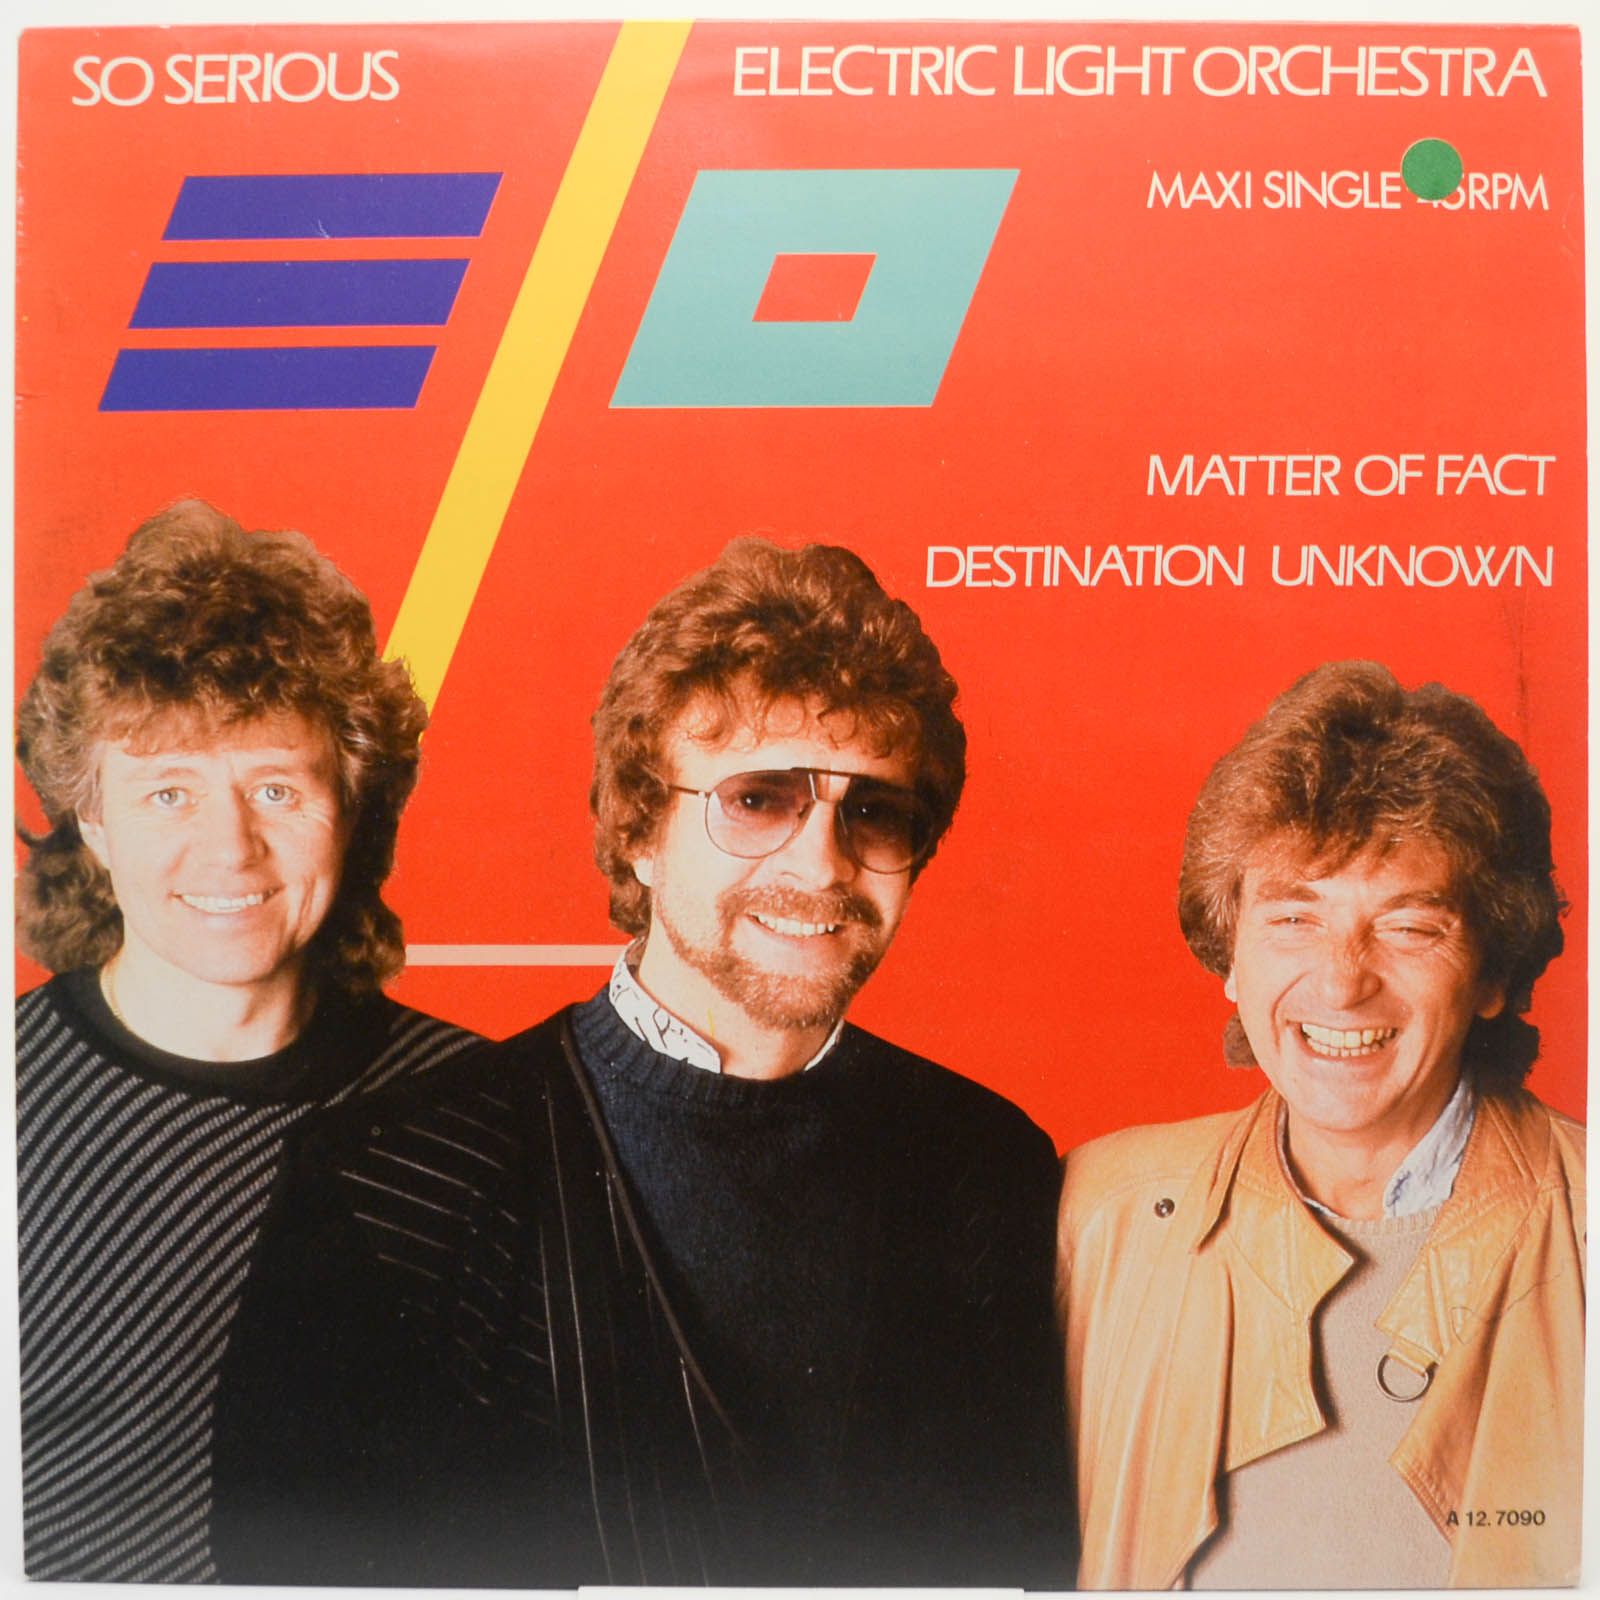 Electric Light Orchestra — So Serious, 1986